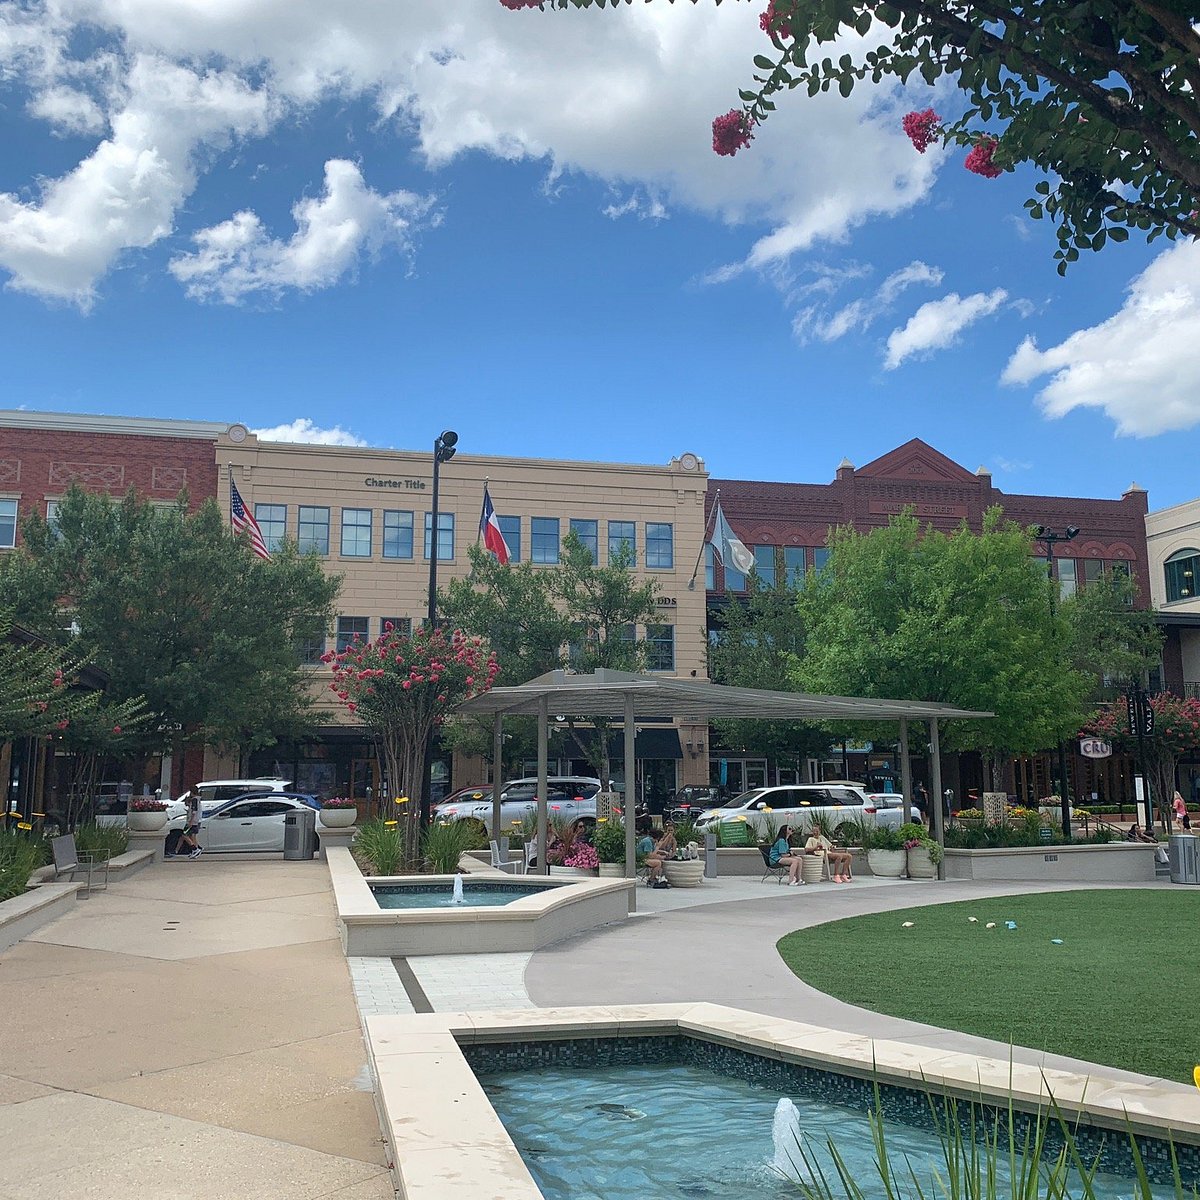 Market street, The Woodlands - Picture of Market Street The